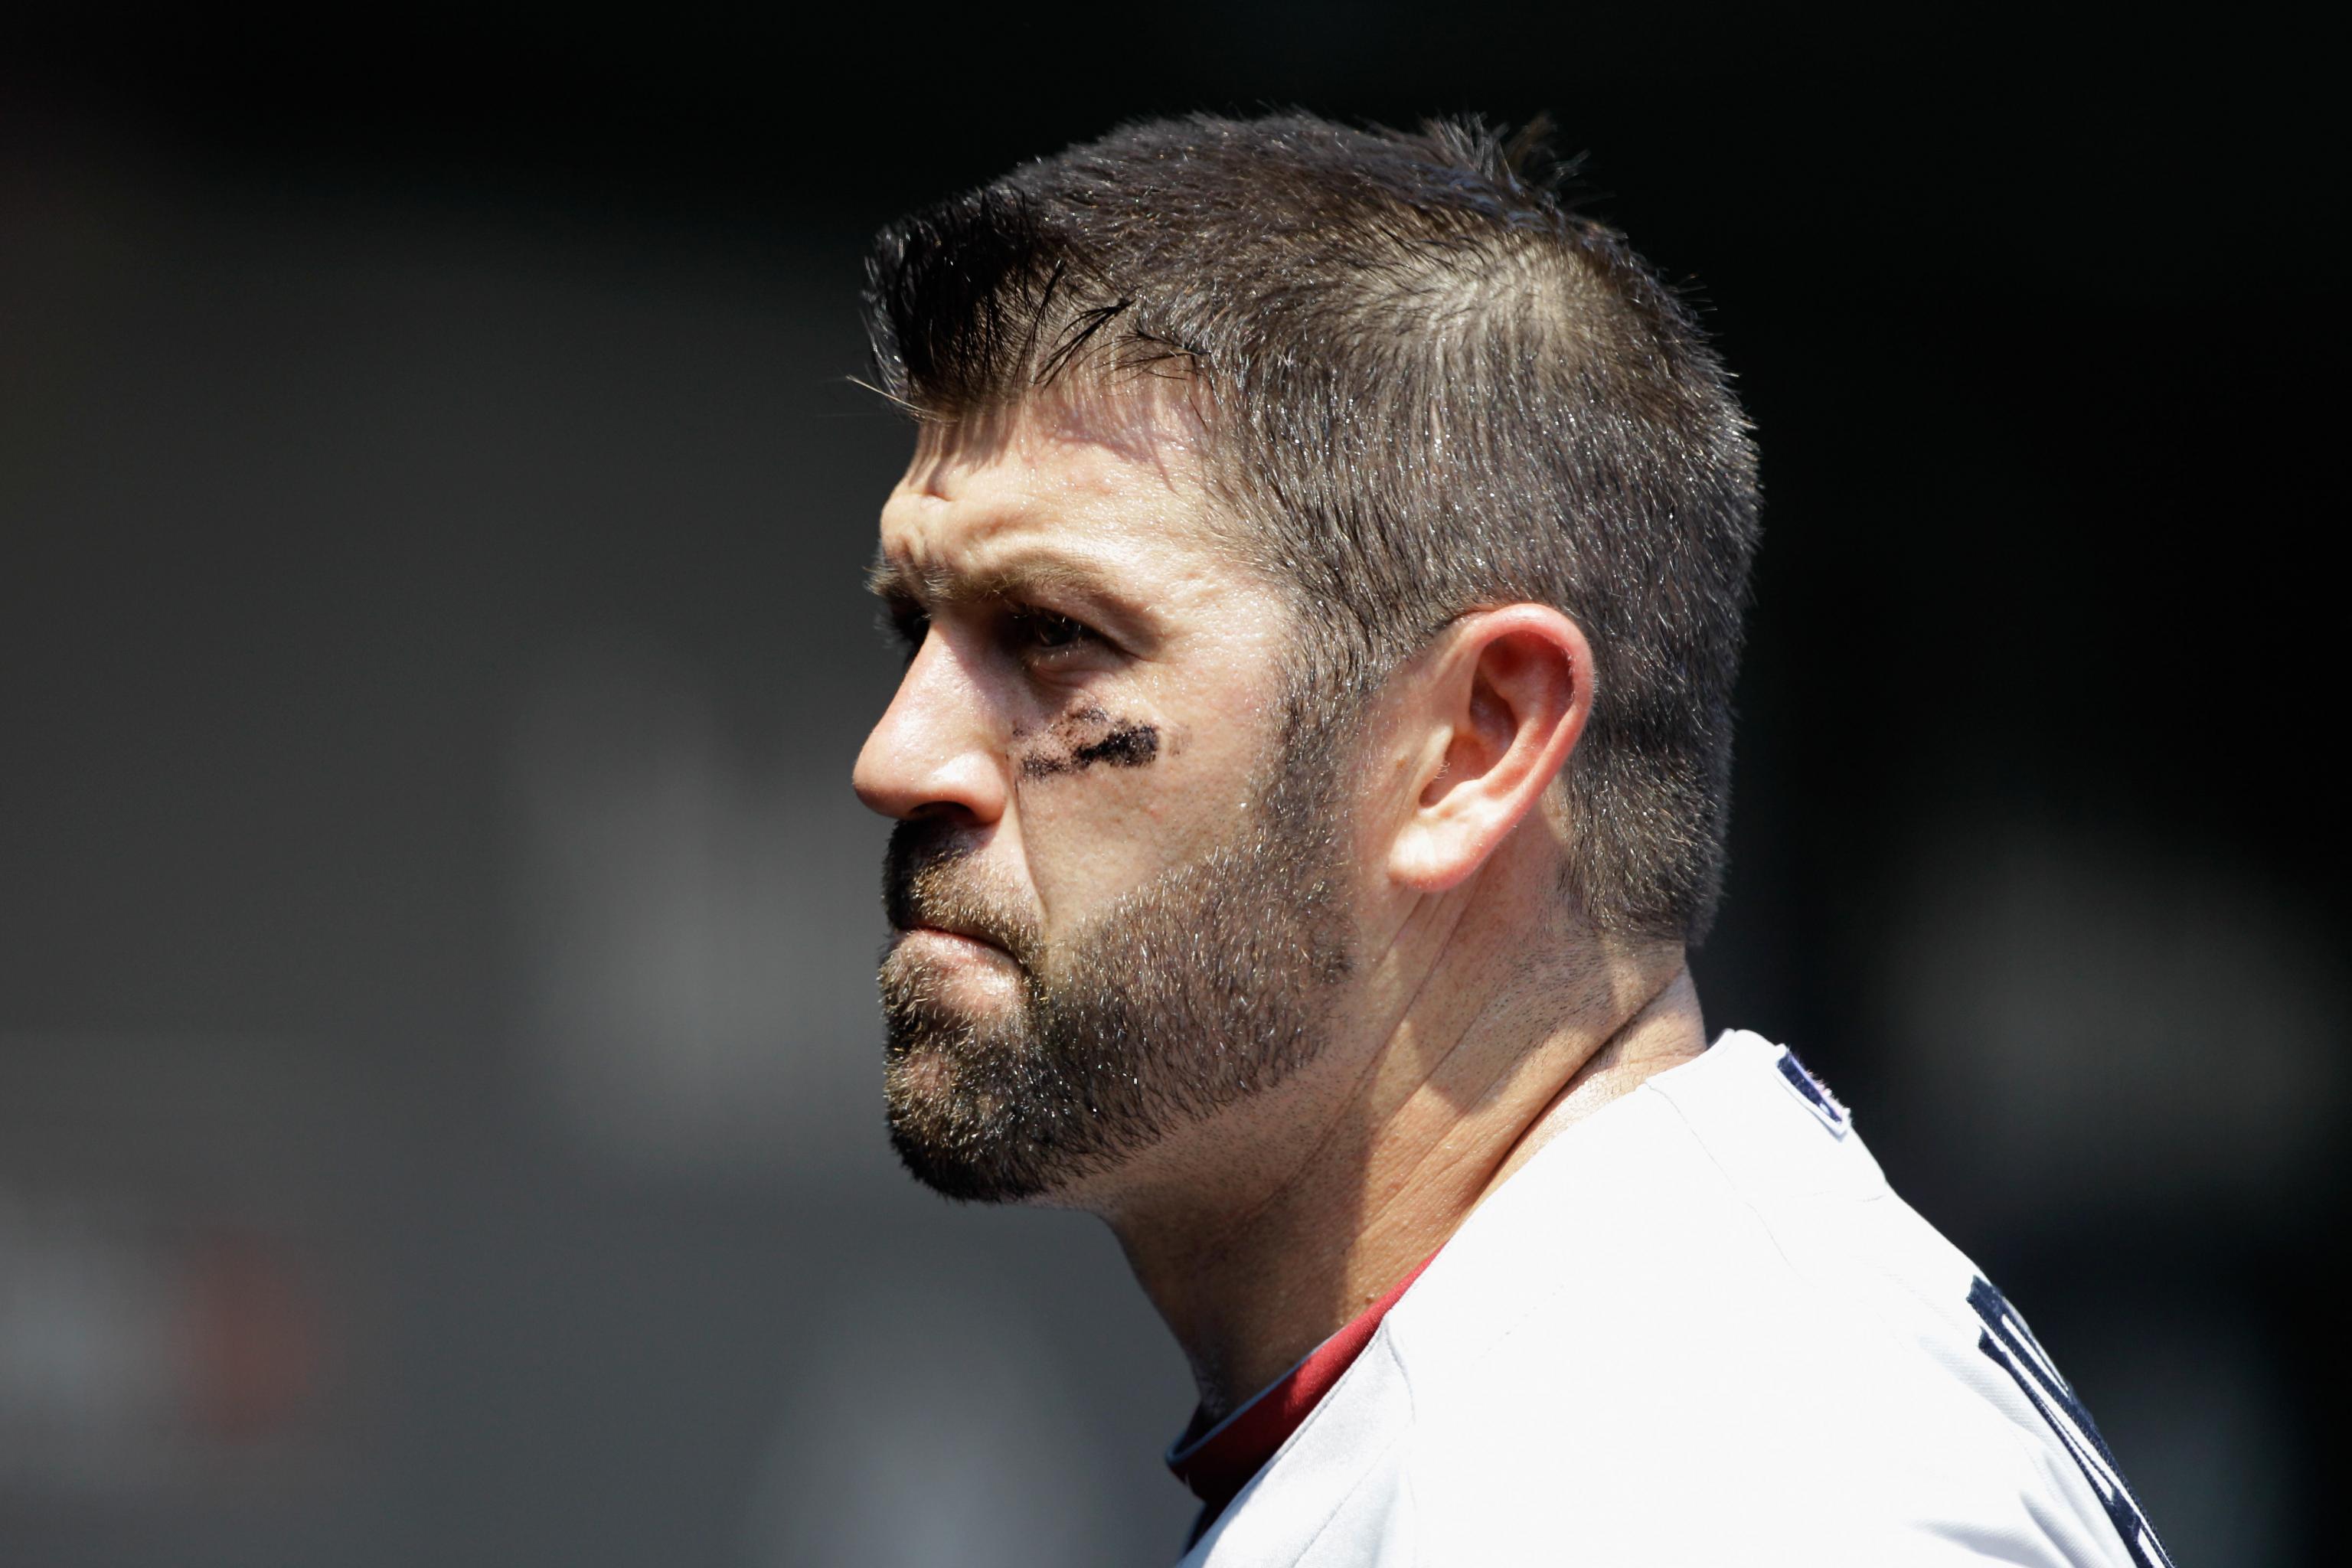 Jason Varitek looks like manager material. So when might he take a